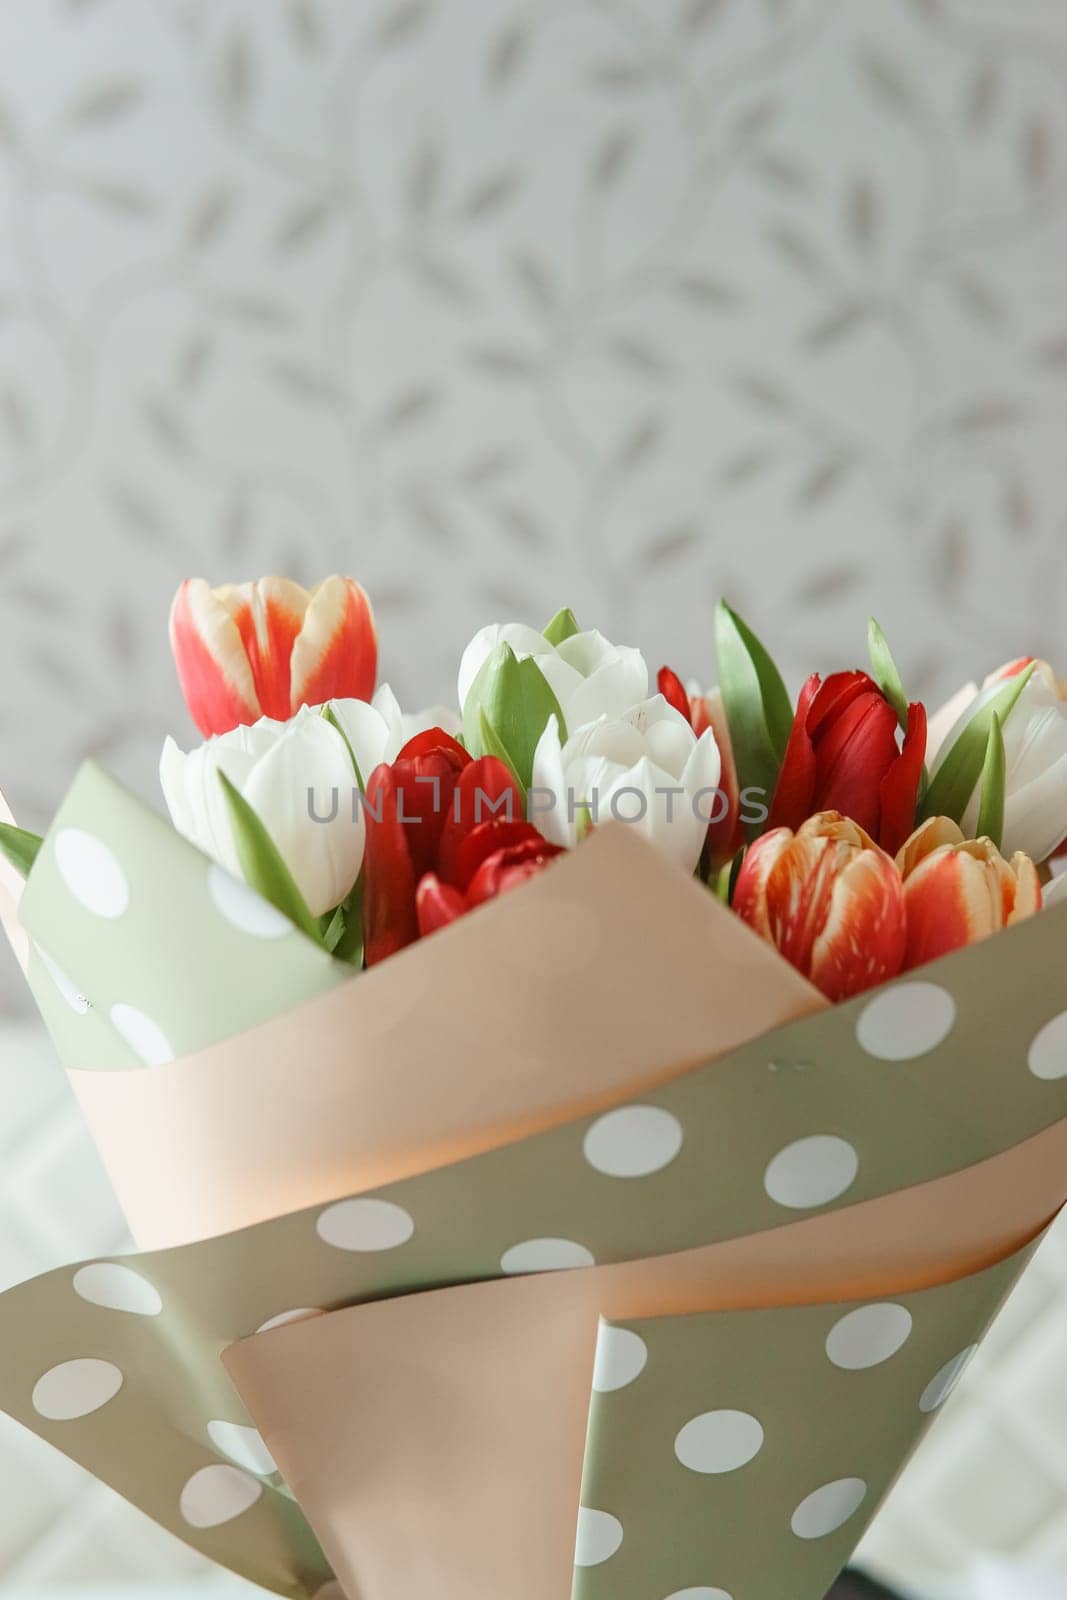 Celebration of Beauty: Tulips in Close-up as a Gift for March 8th